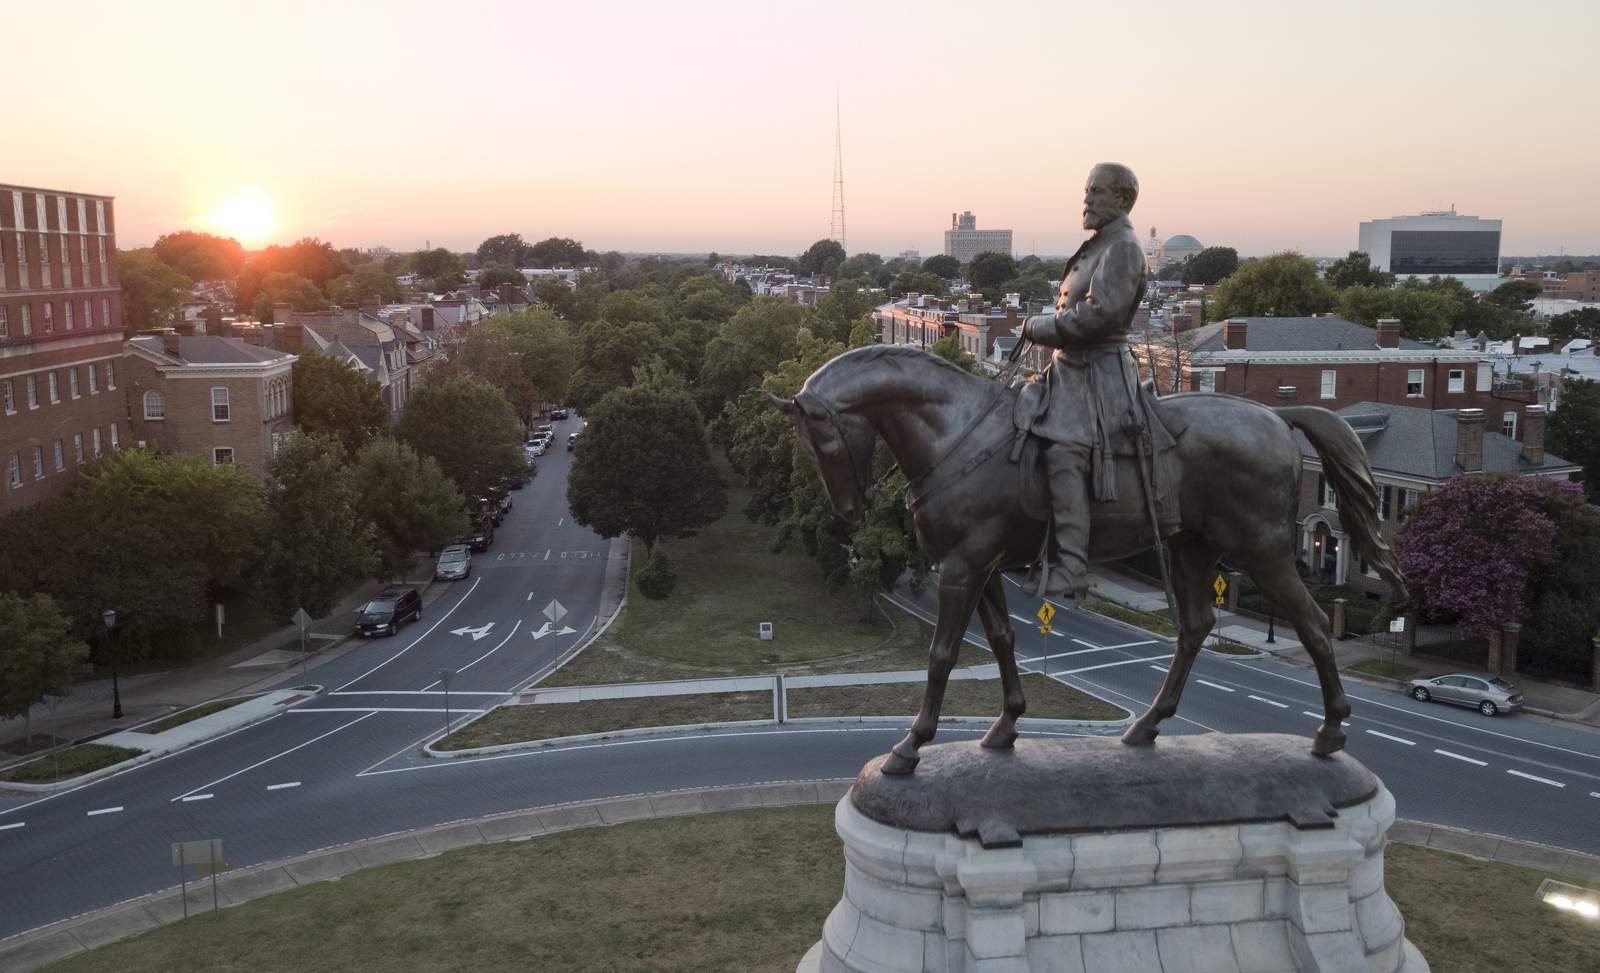 Poll: Virginians about evenly divided on Confederate statues